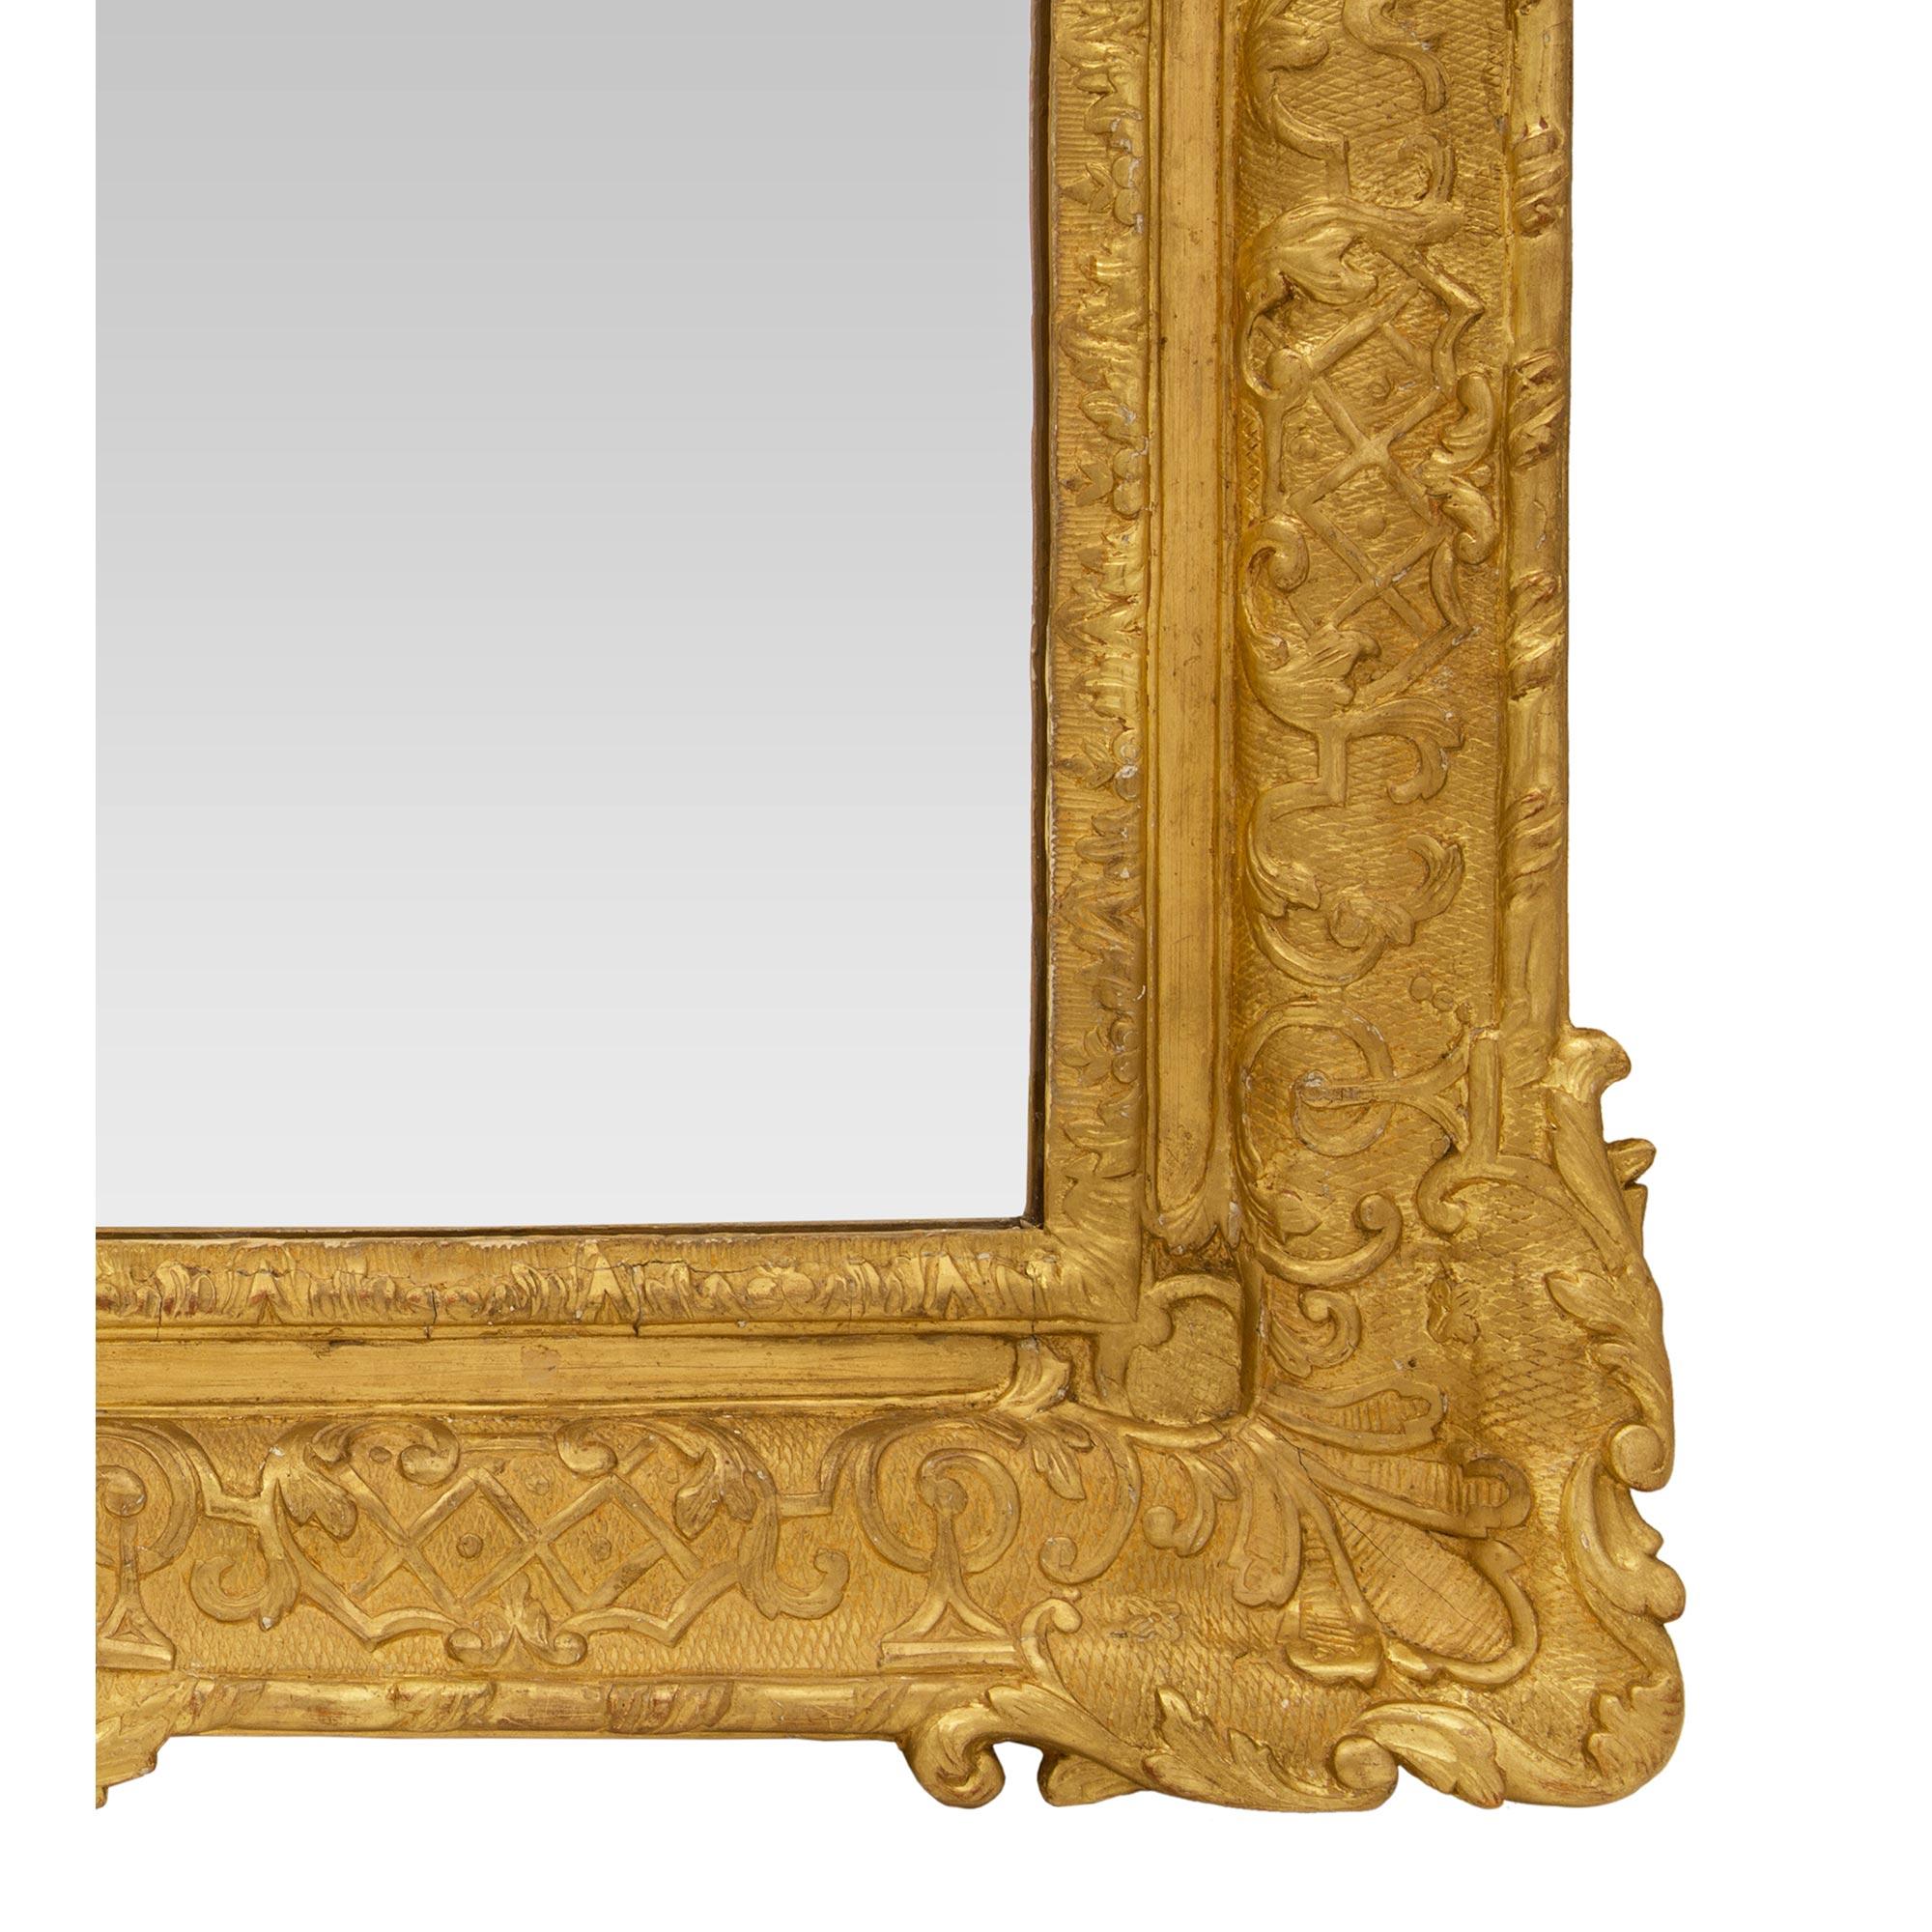 French 18th Century Regence Period Giltwood Mirror For Sale 3